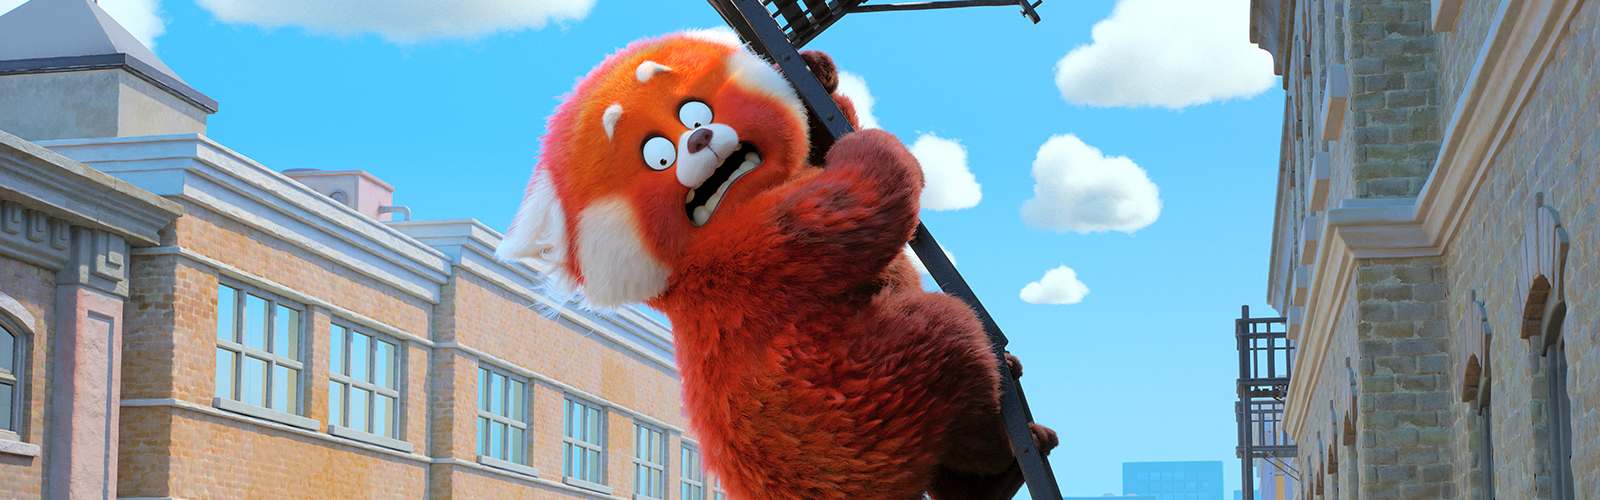 Turning Red' Review: Pixar's Most Personal, And Weird, Film